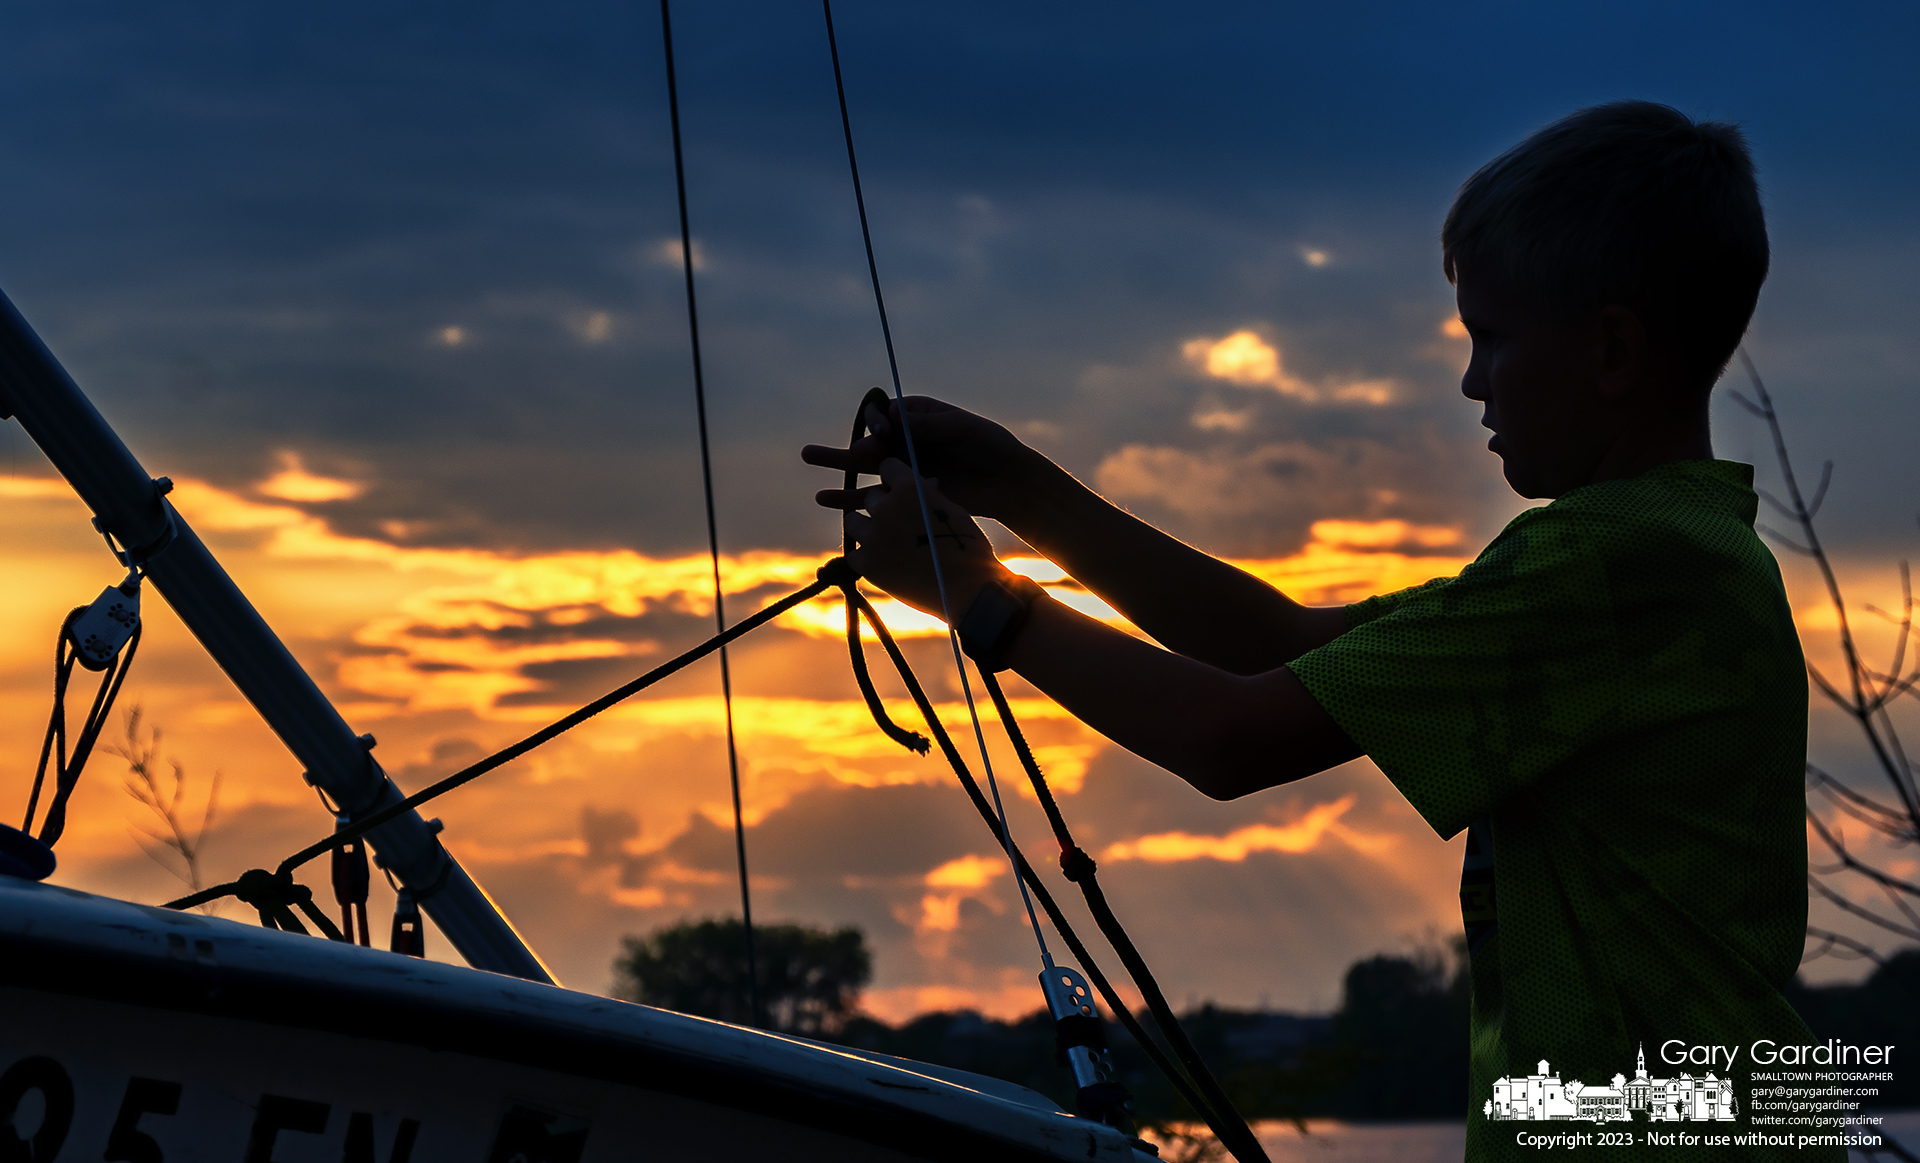 A young sailor ties of the lines on his boat after finishing training races at Hoover Reservoir Thursday at sunset. My Final Photo for September 7, 2023.